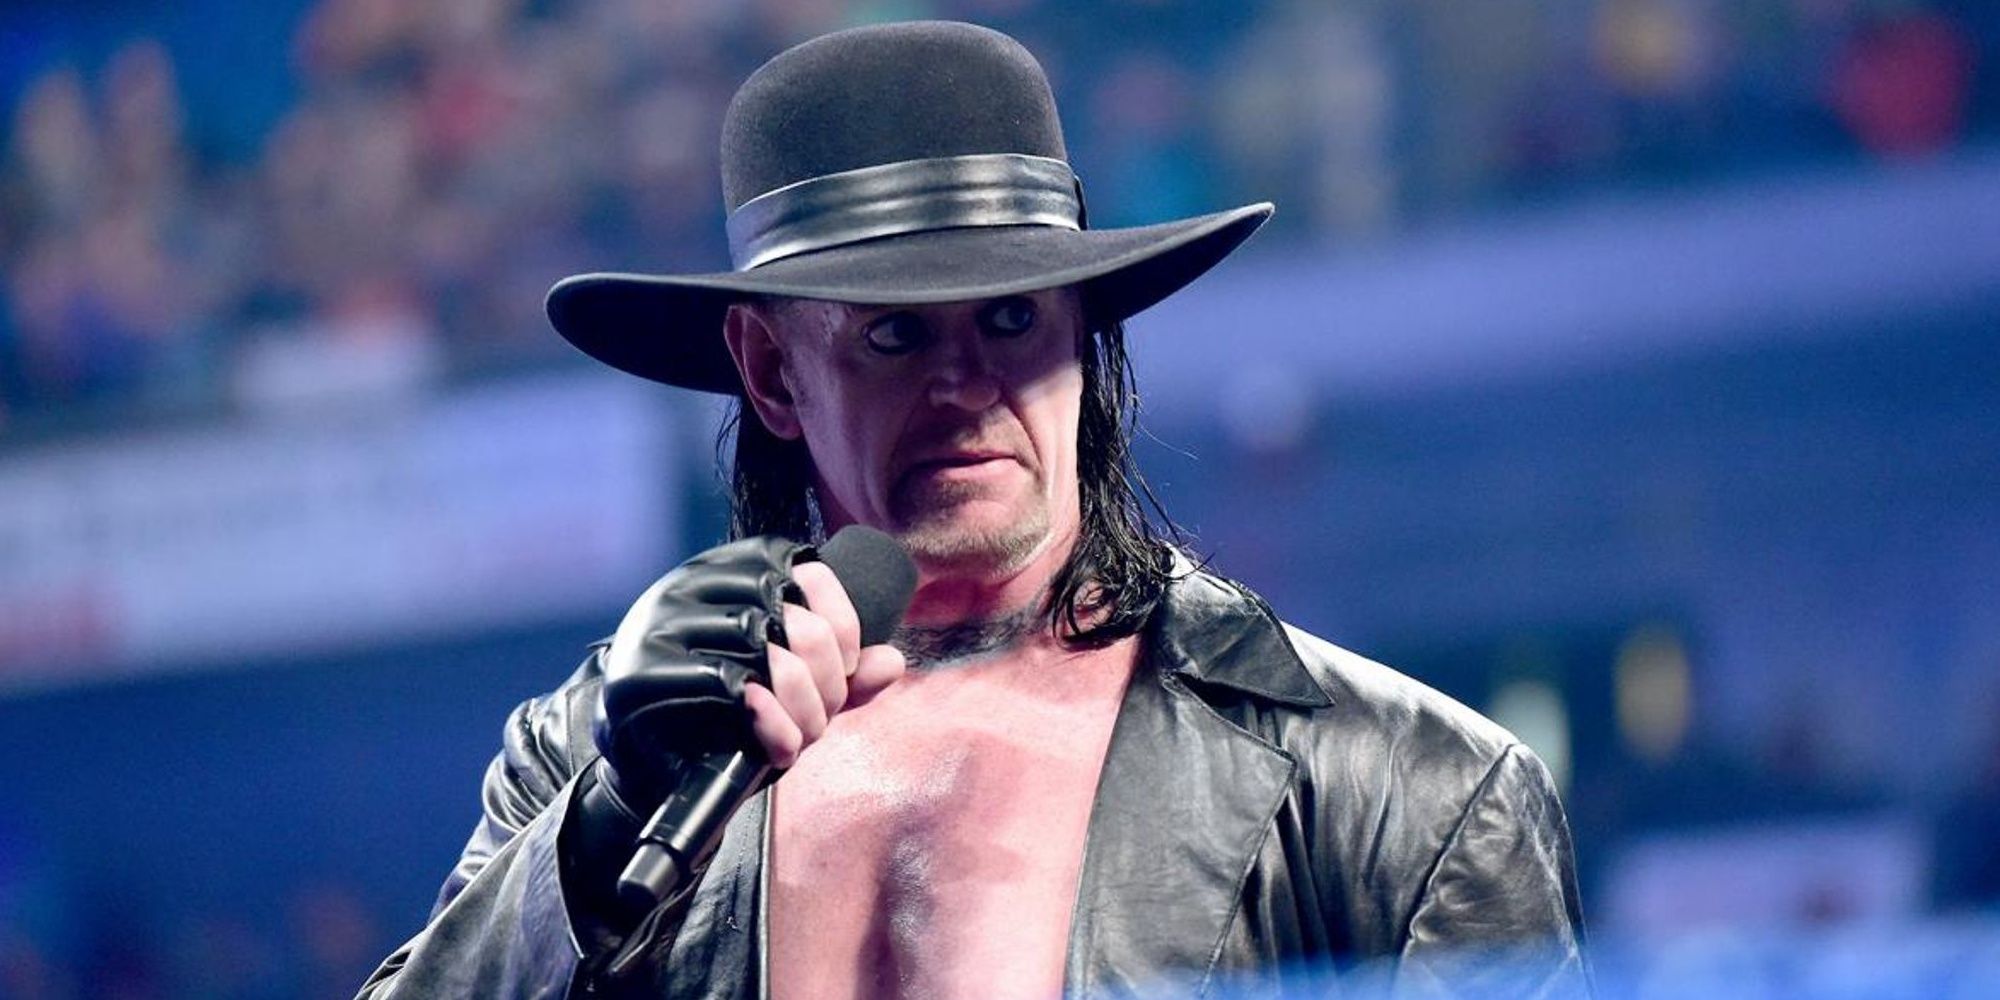 An image of former WWE champion The Undertaker